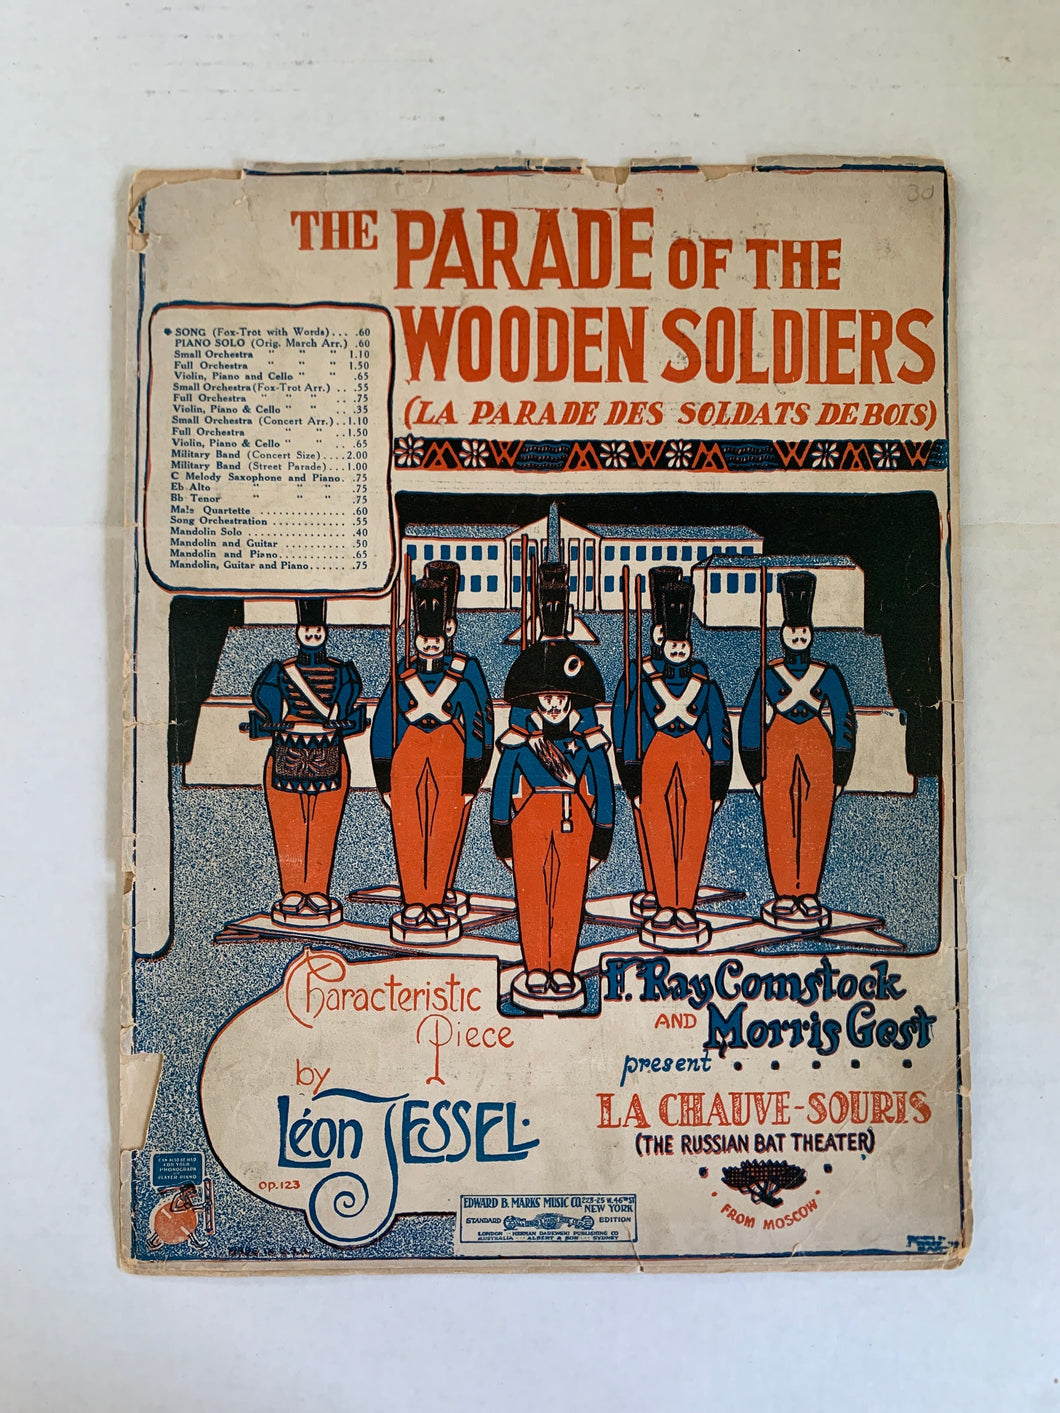 Antique 1920s “Parade of the Wooden Soldiers” Sheet Music